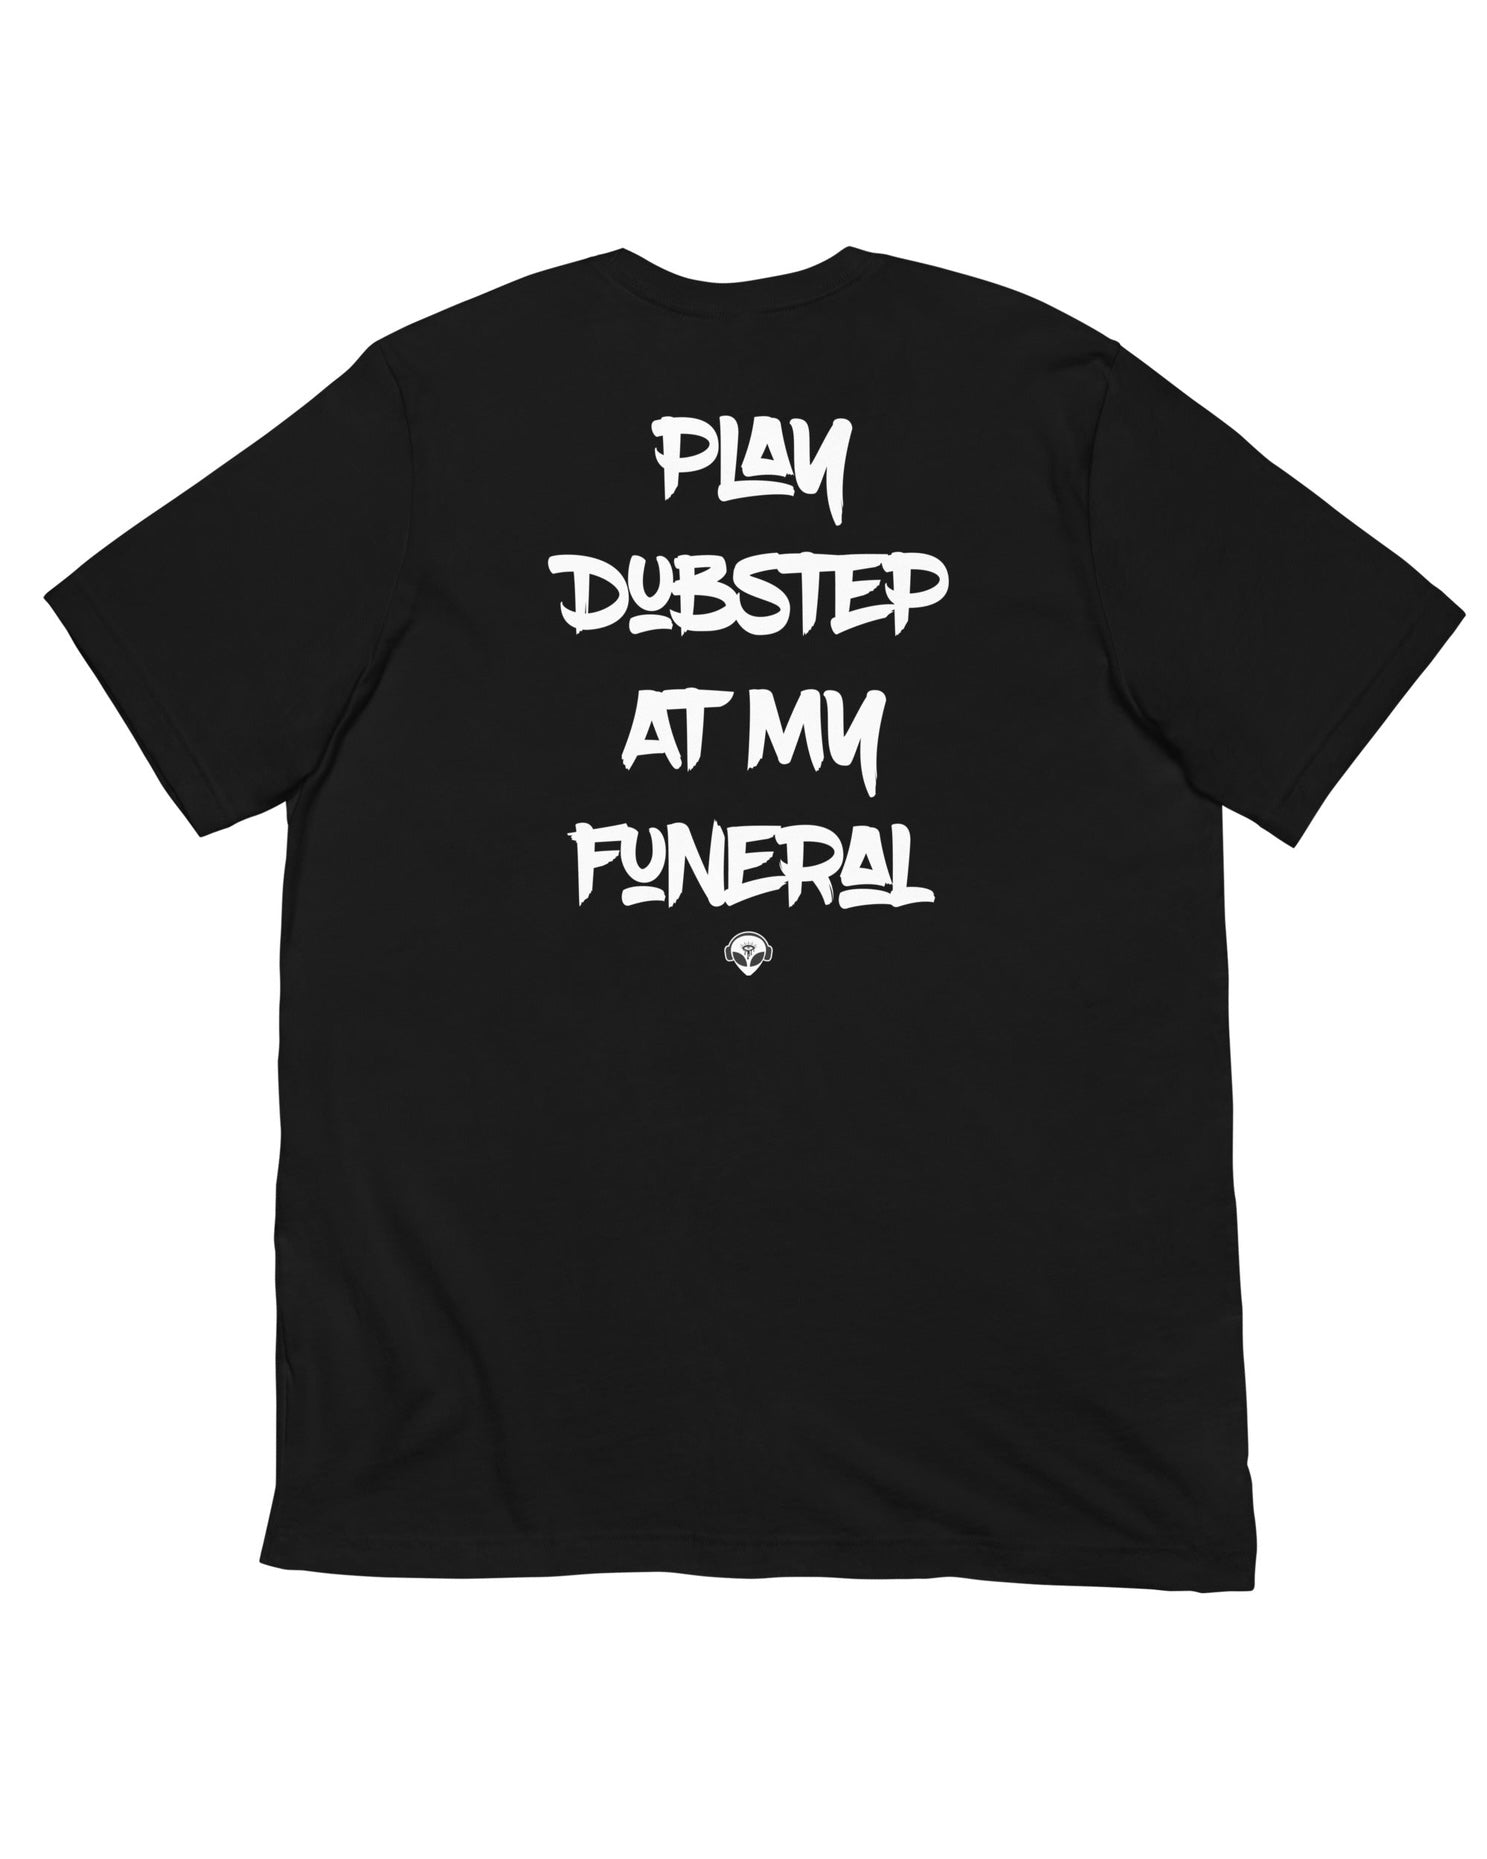 Back side a black t-shirt with the phrase "PLAY DUBSTEP AT MY FUNERAL" & a alien head below it.